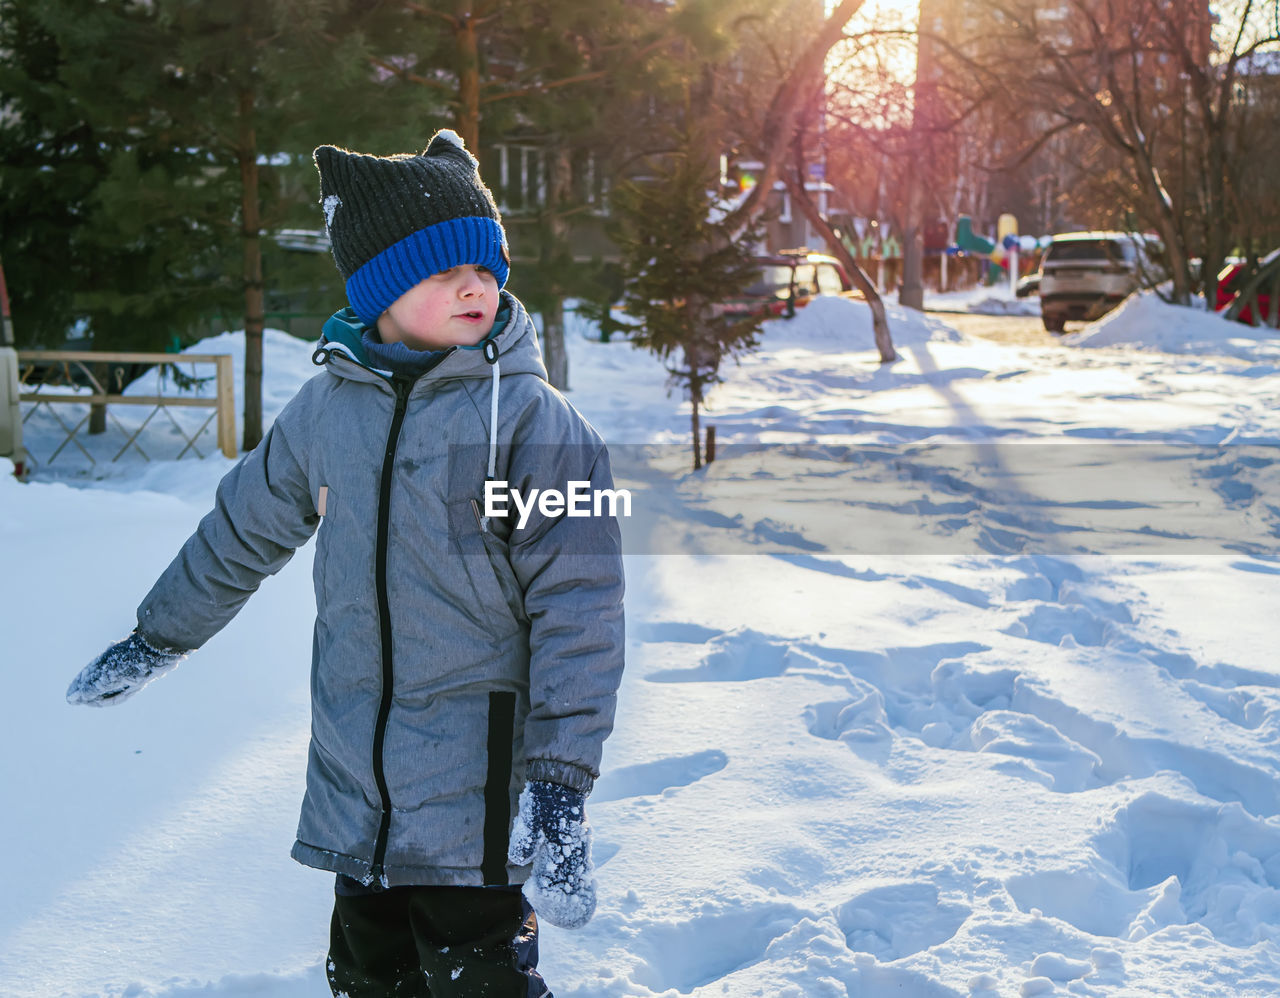 Smiling caucasian boy in green jacket and blue knit cap is standing on the snow.